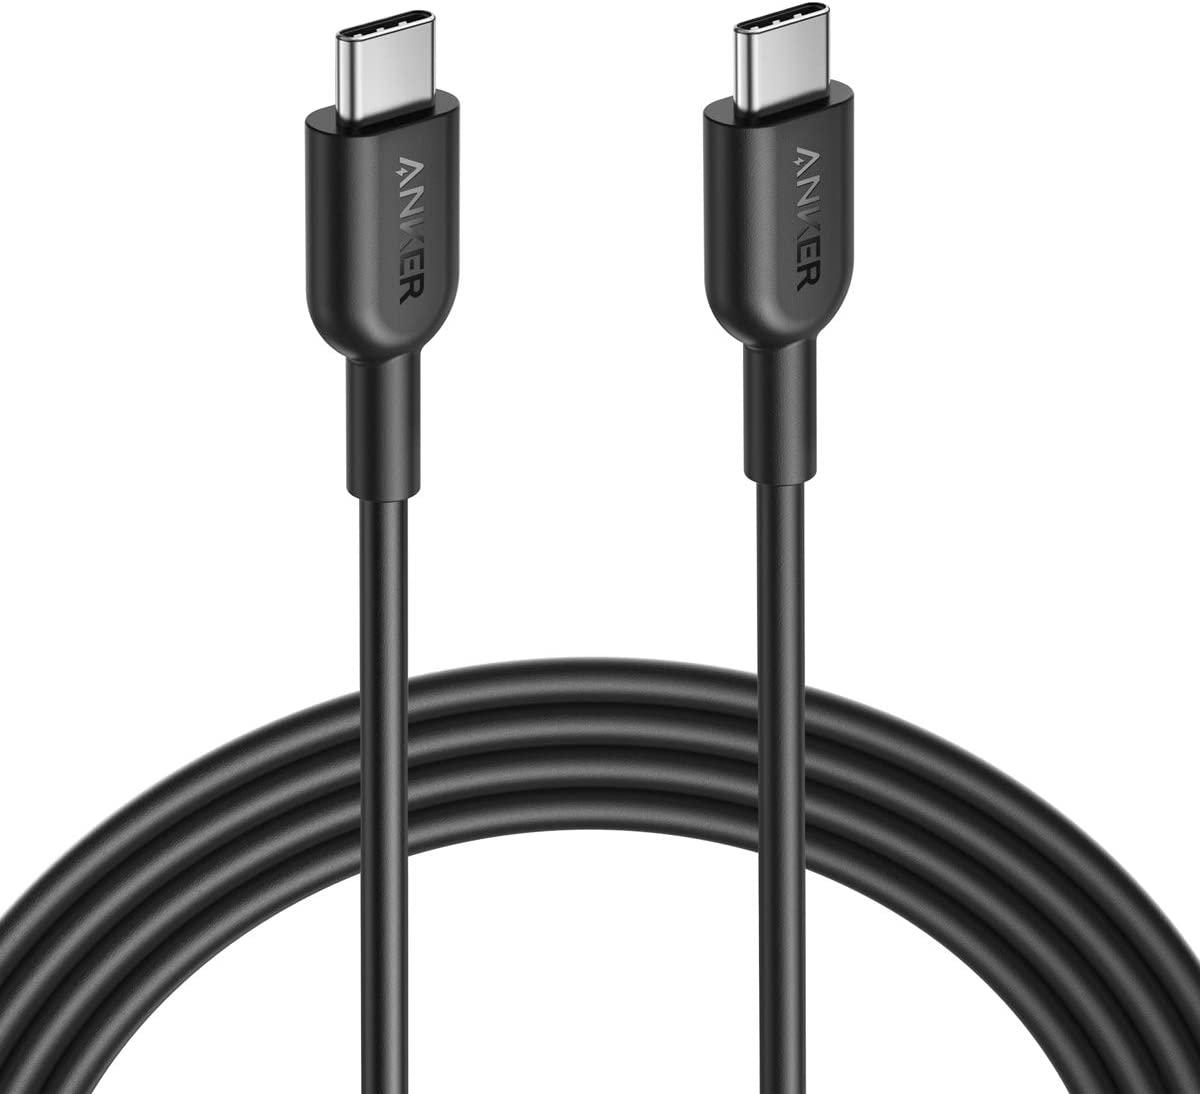 Anker Powerline II USB C to USB C 2.0 Cable for $6.50